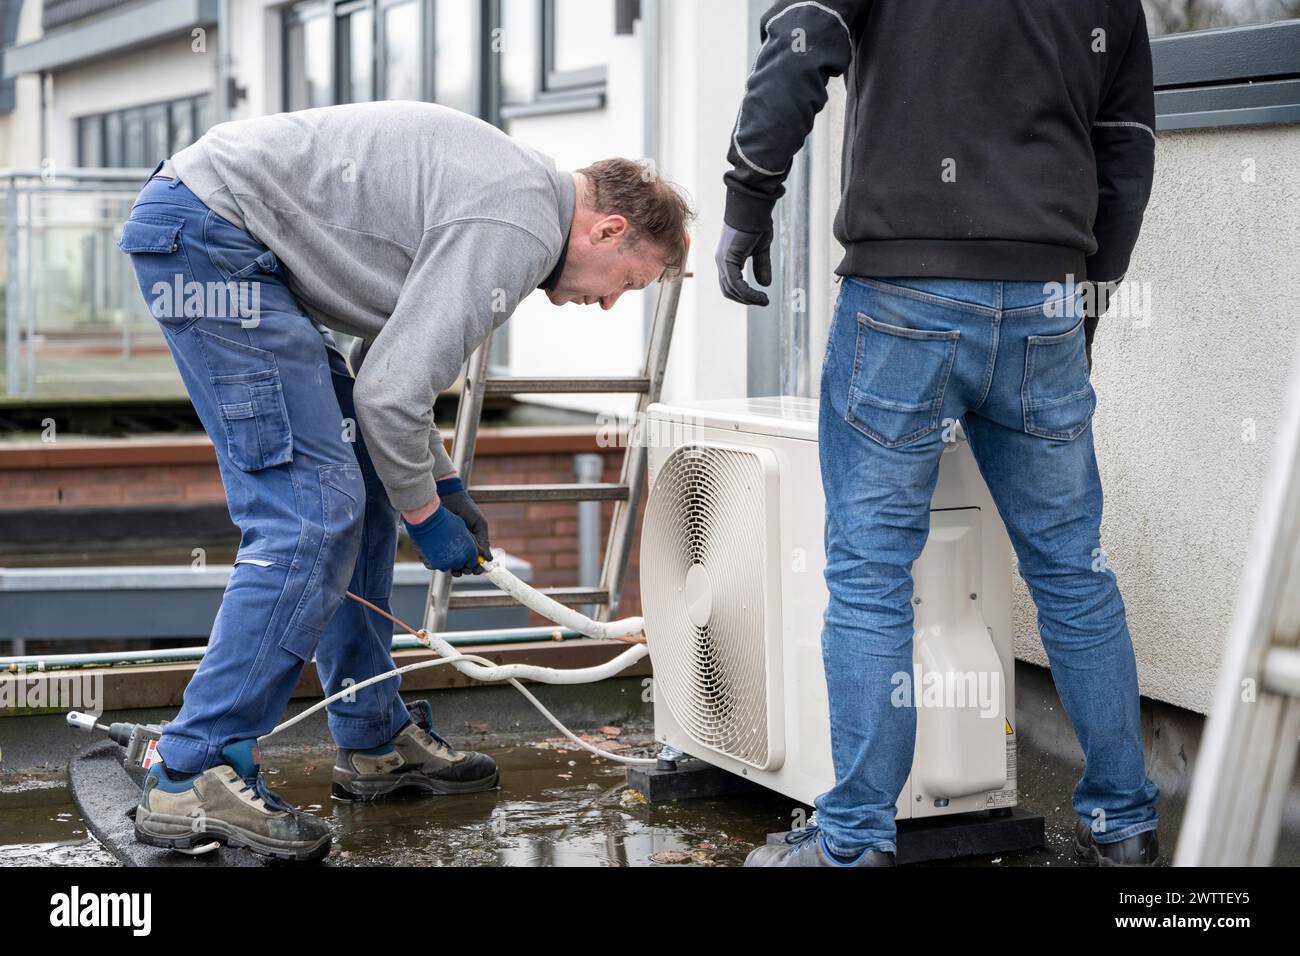 Two technicians installing an airconditioning unit outside a modern home. Stock Photo